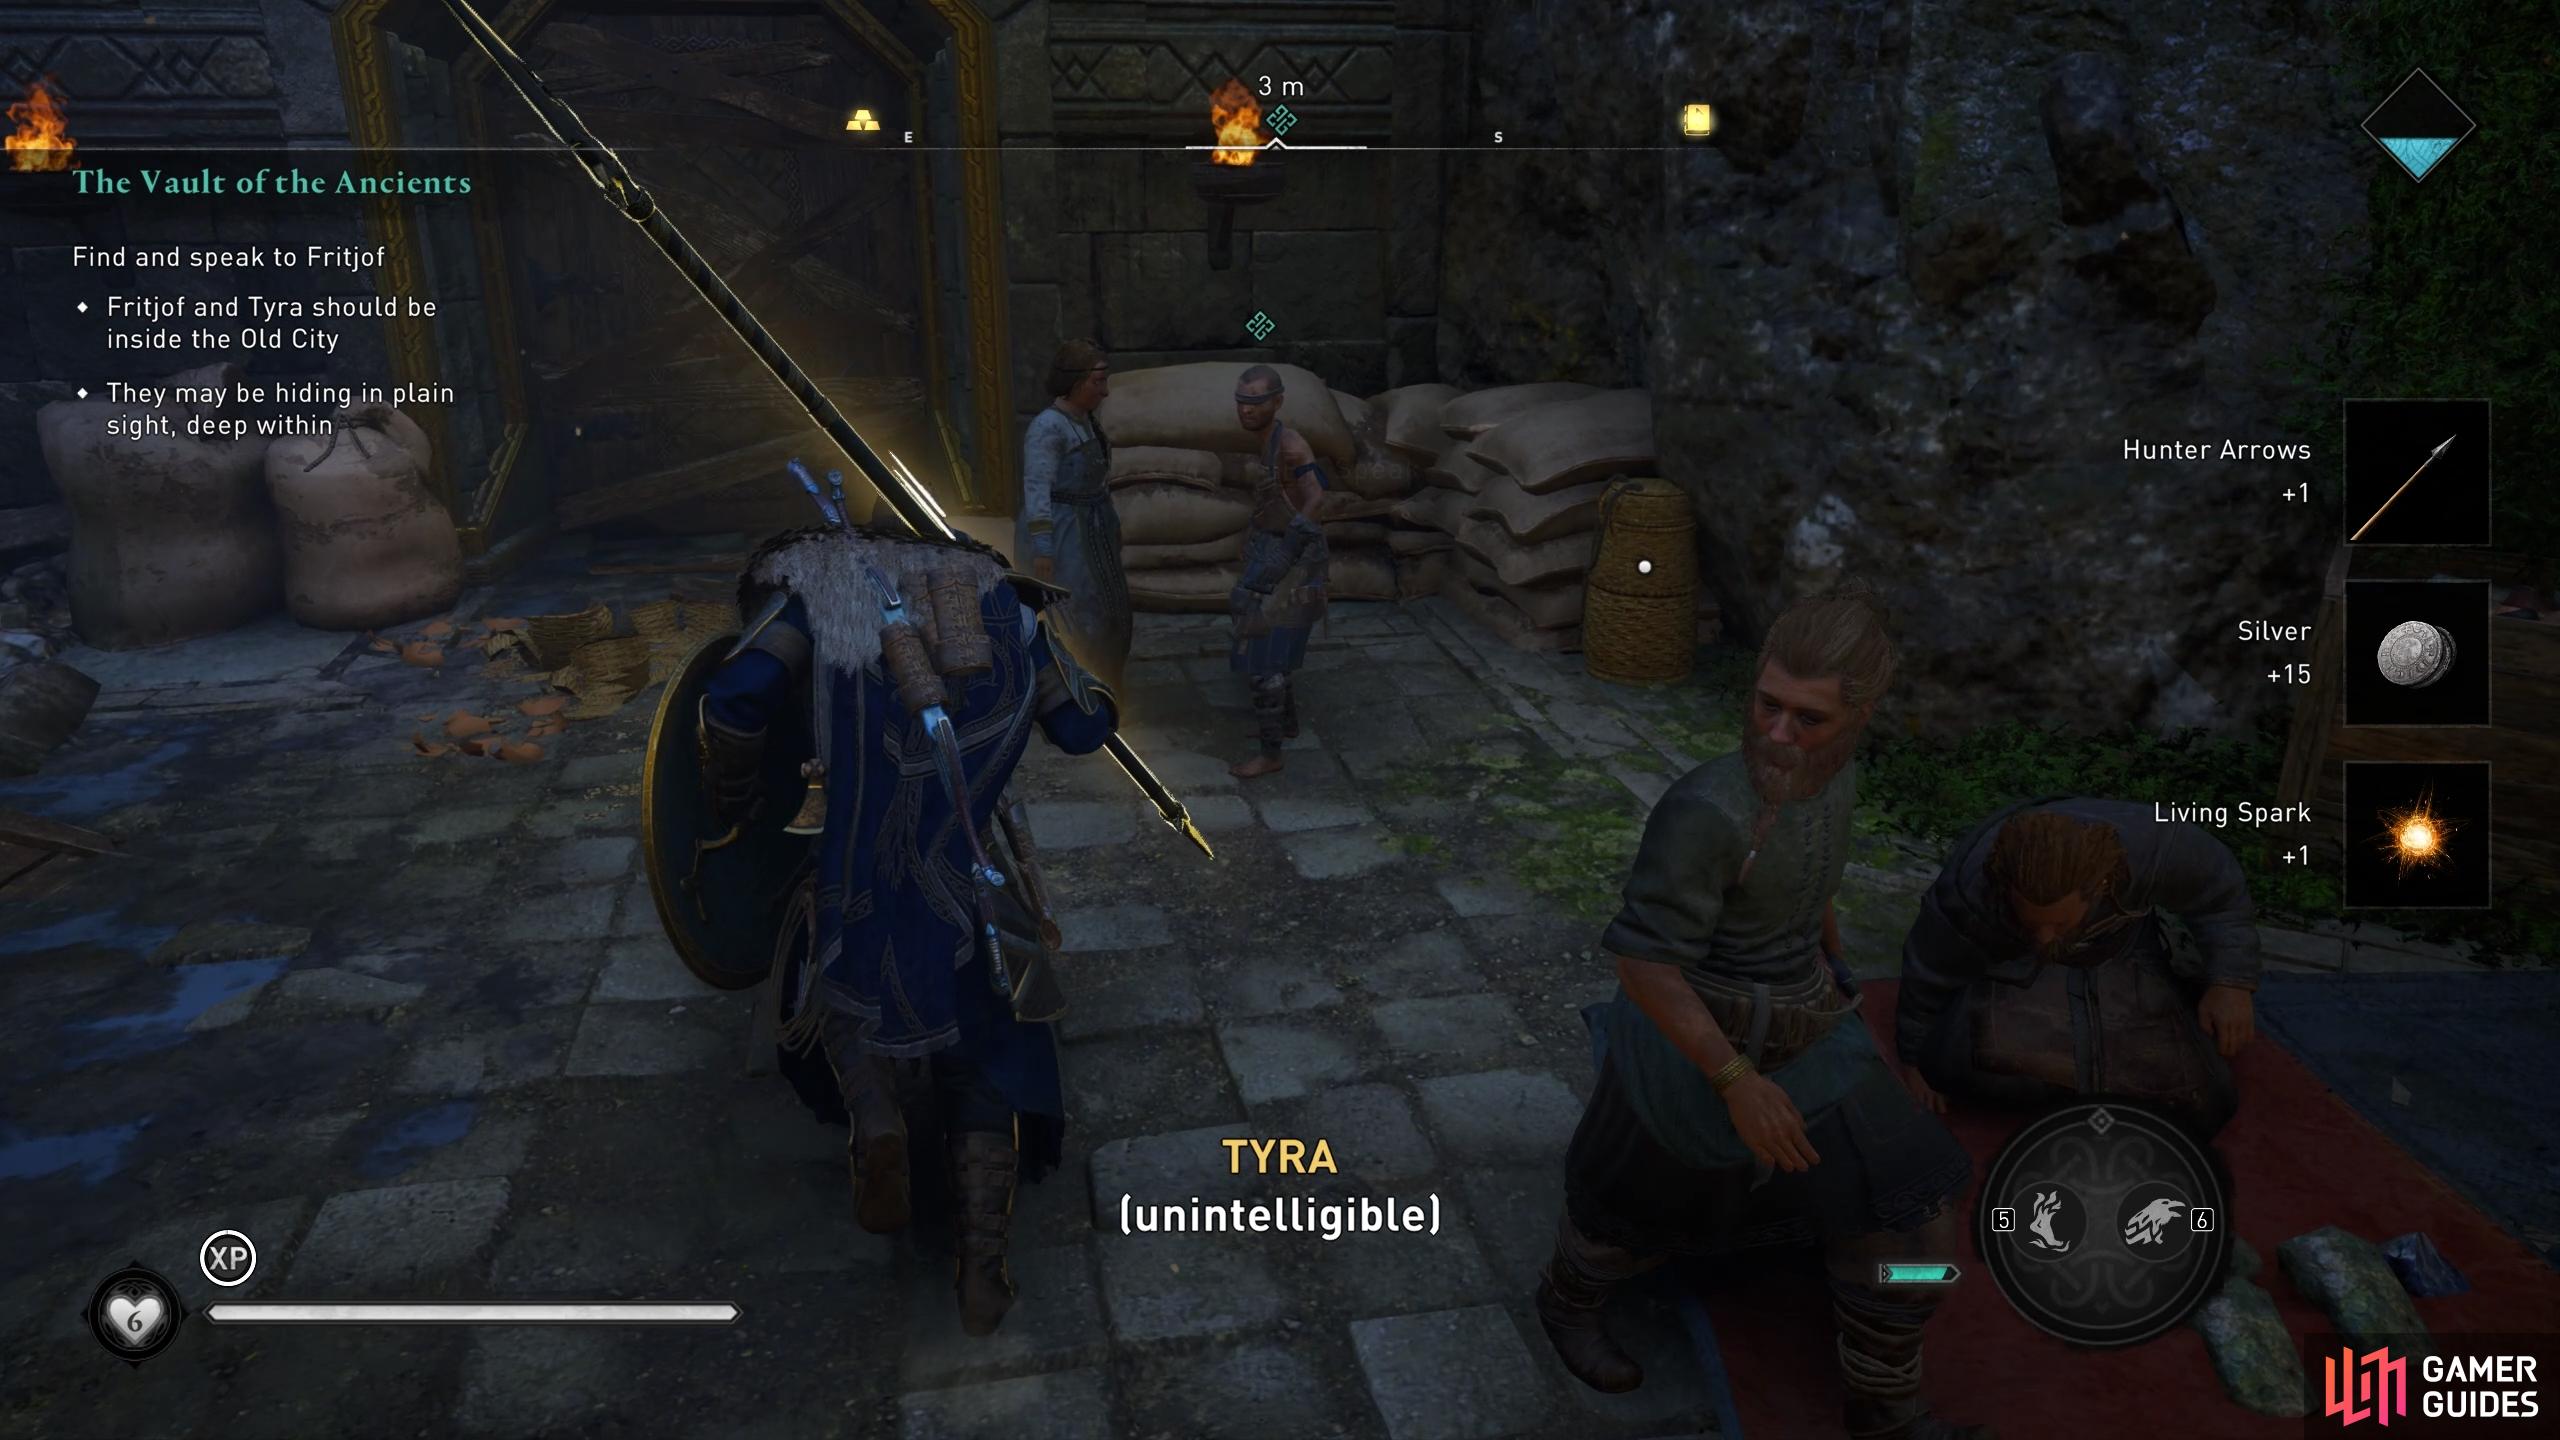 Youll find Fritjof and Tyra in the southeastern part of the cavern.